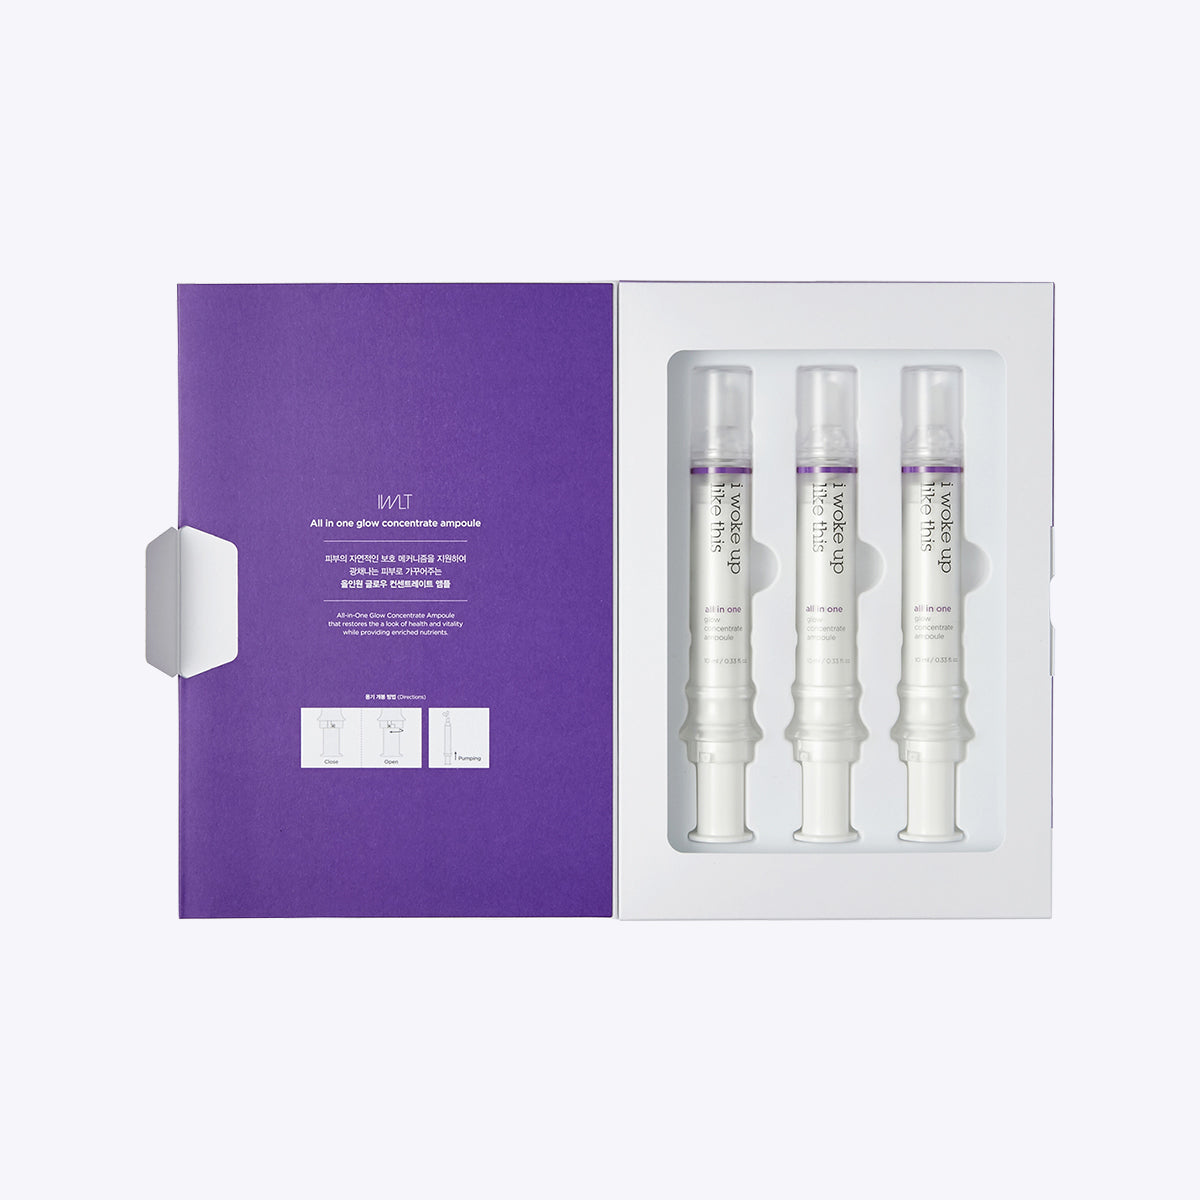 All-In-One Glow Concentrate Ampoule 10ml x 3